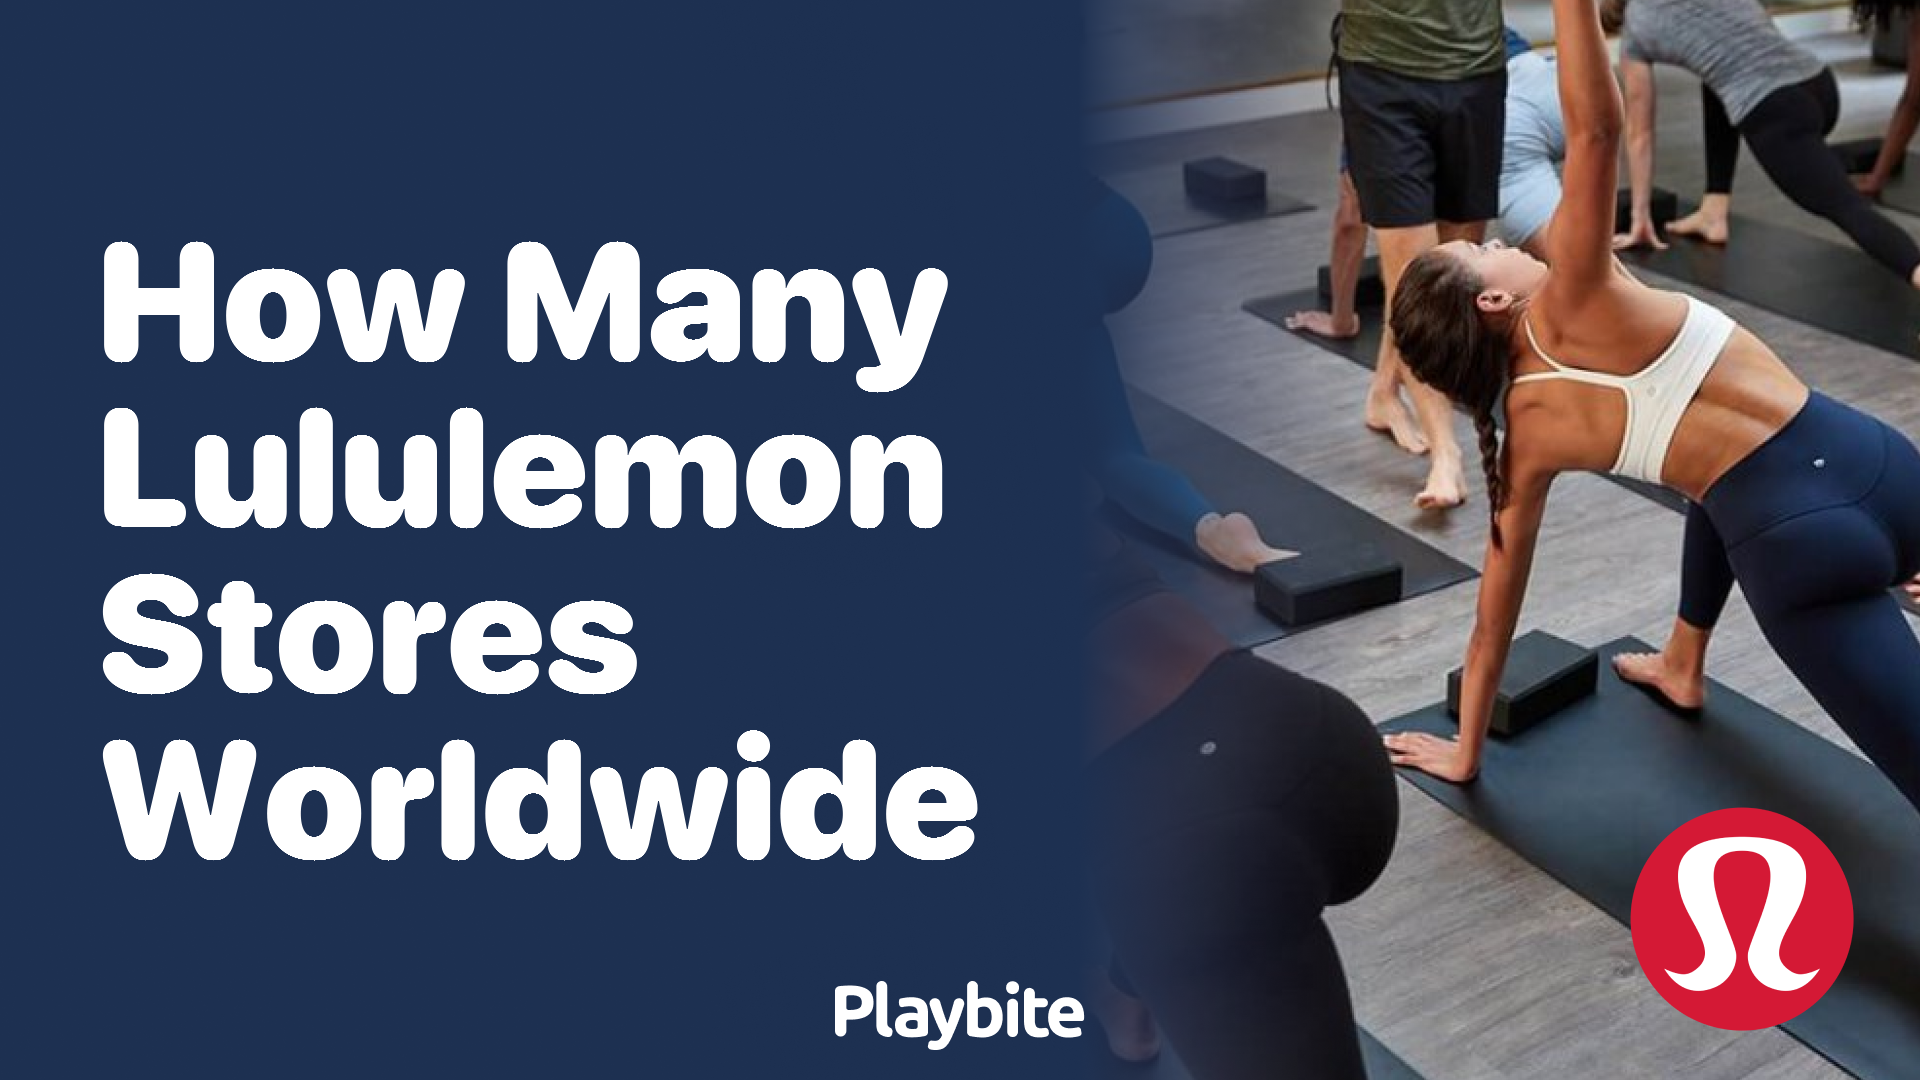 How Many Lululemon Stores Are There Globally? - Playbite